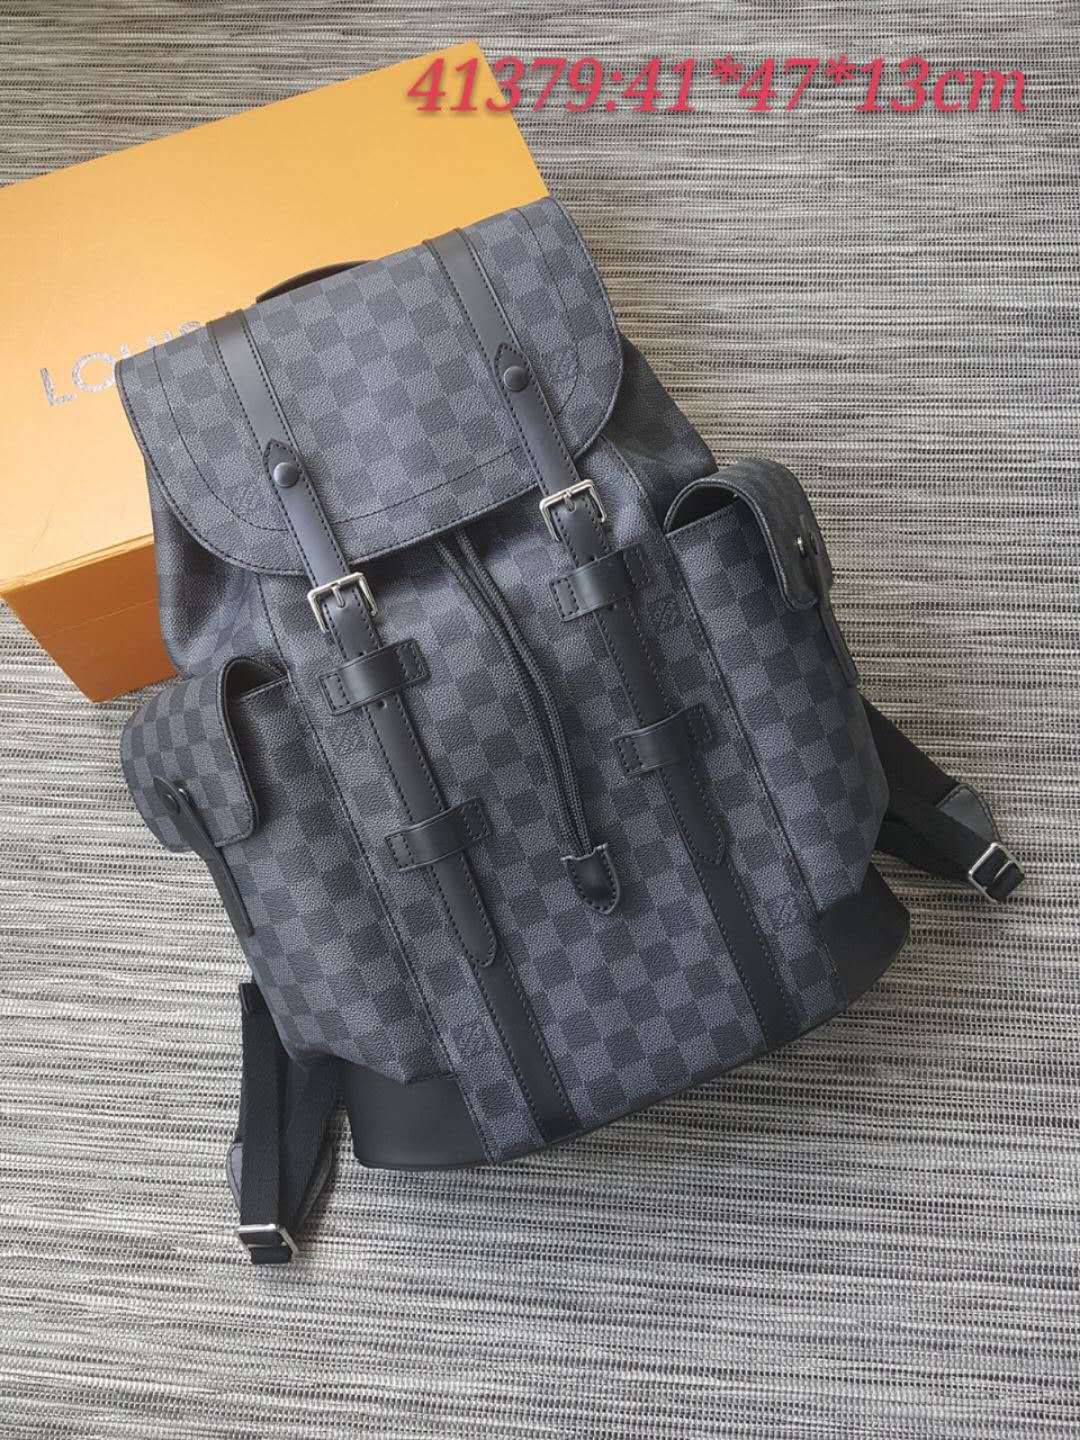 Backpack LV 602 without box Size 41-47-13